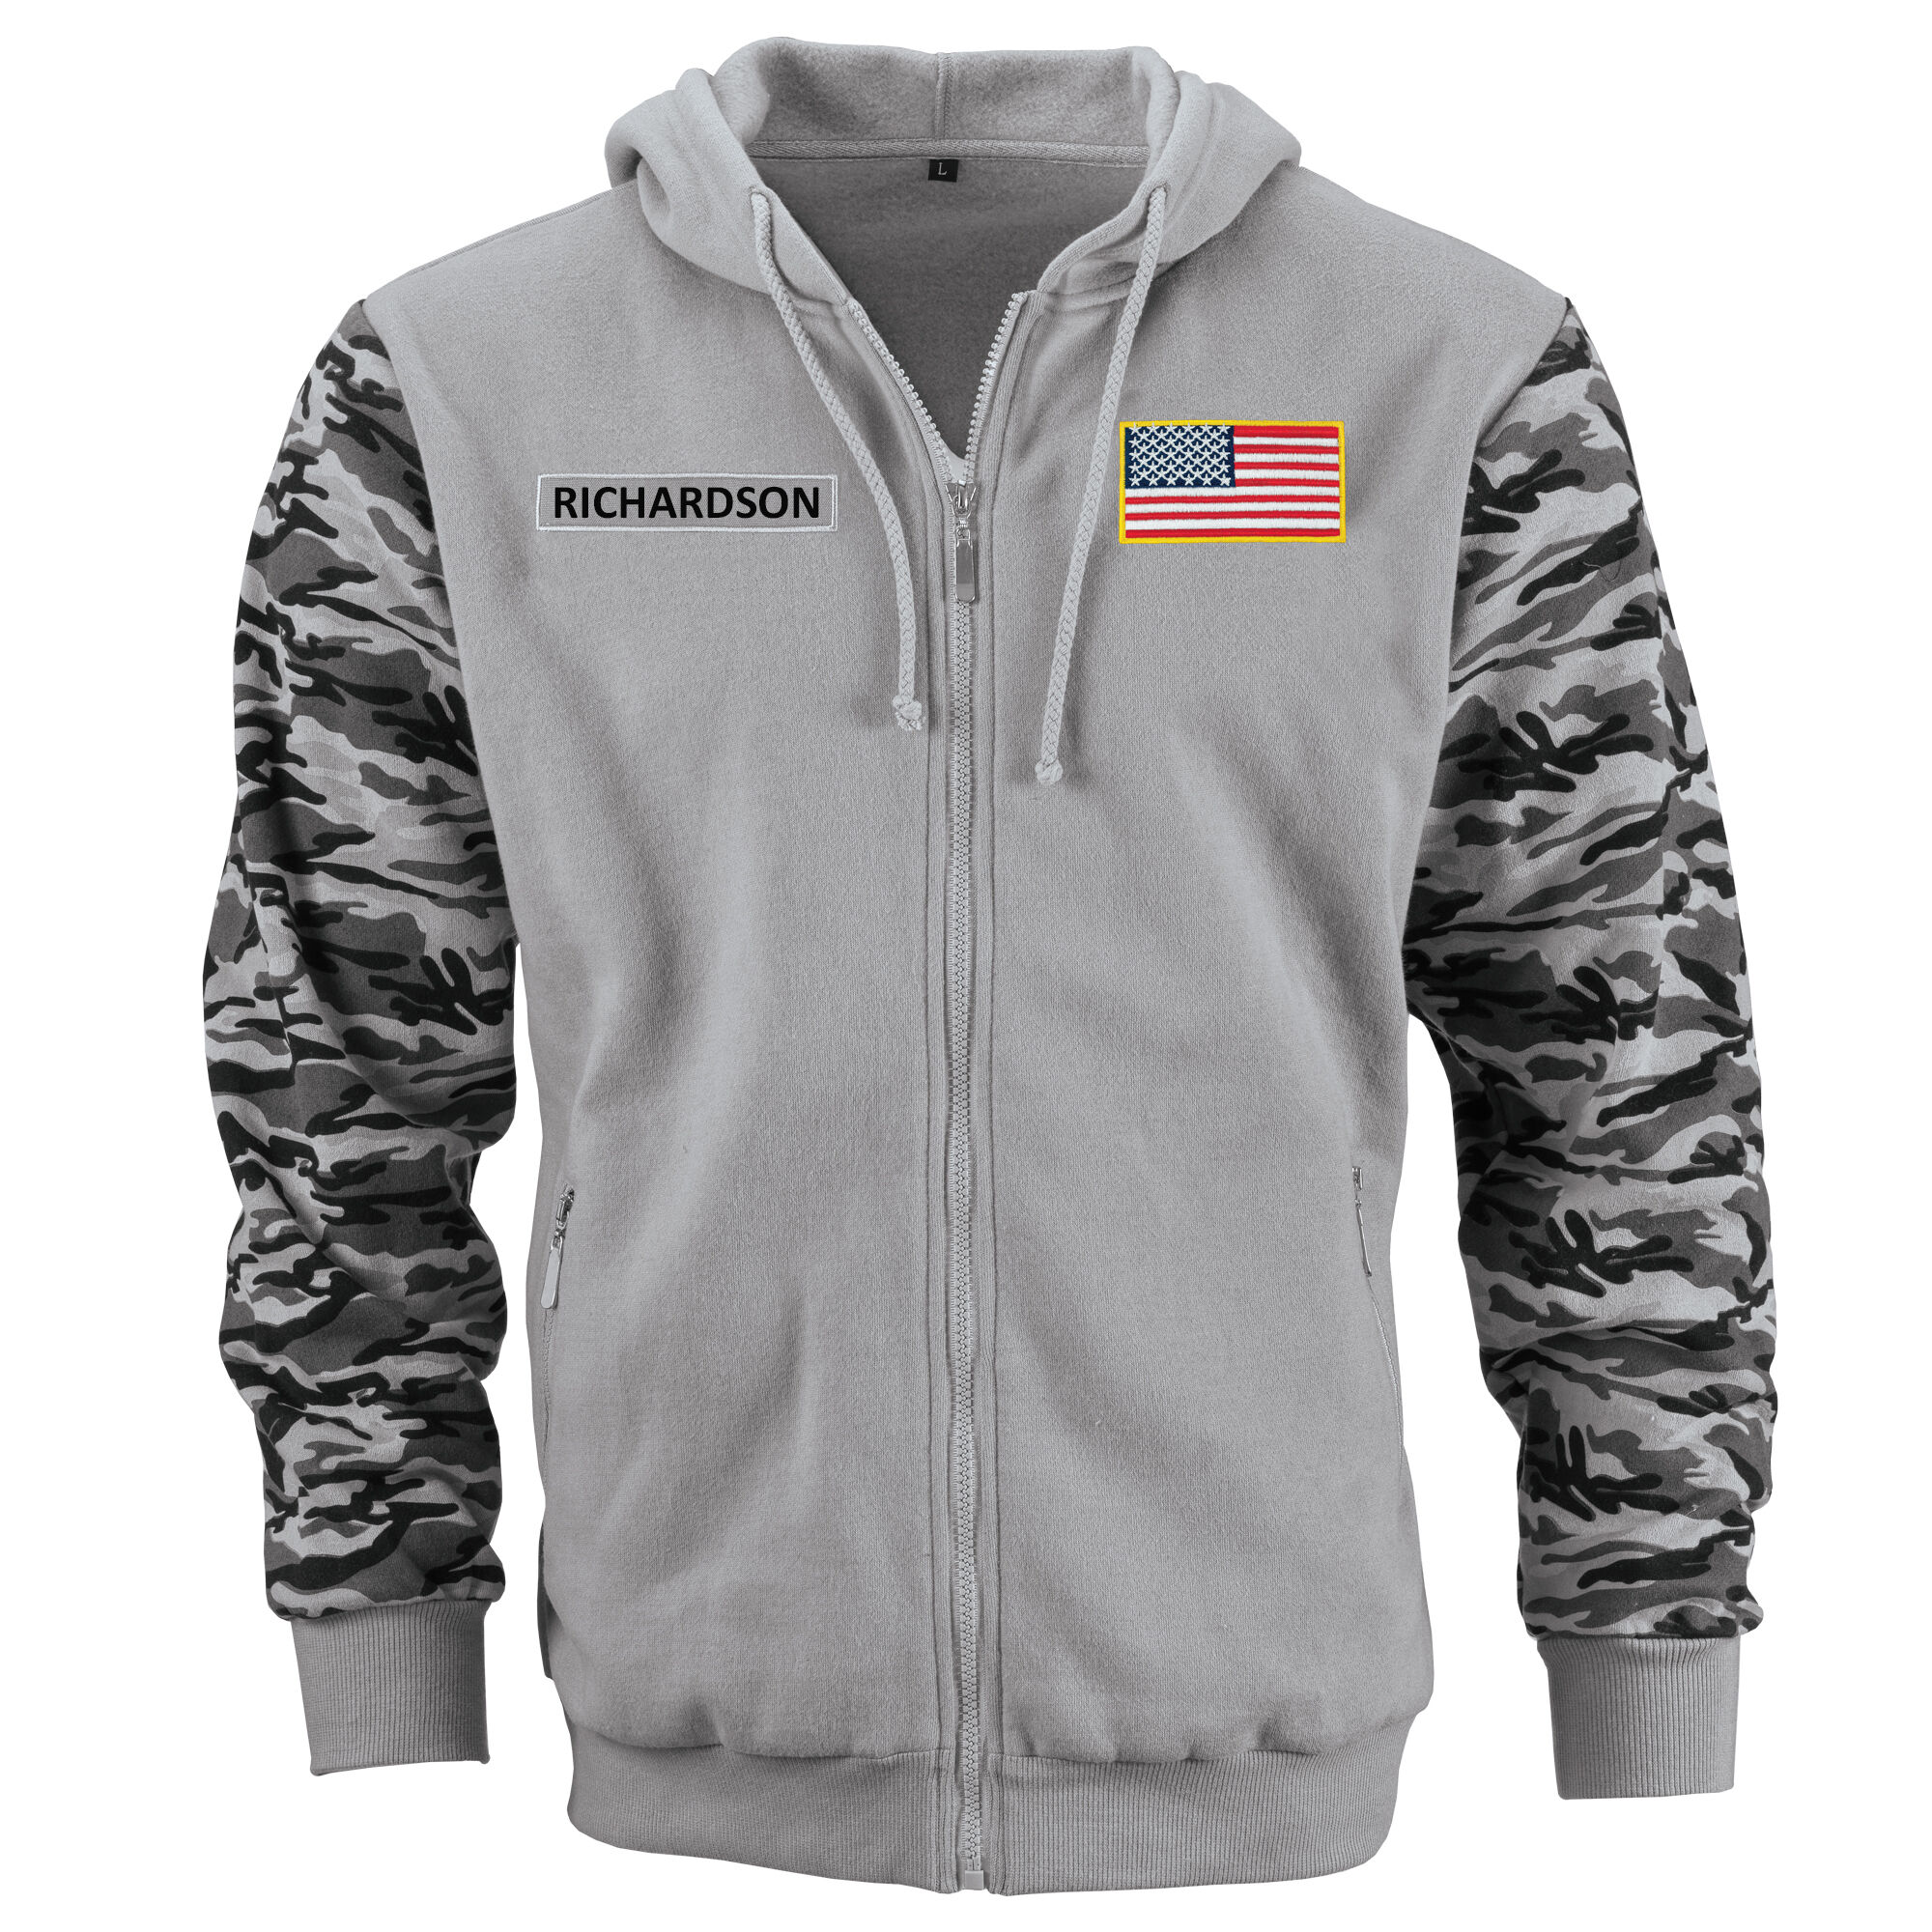 The Personalized U.S. Army Hoodie